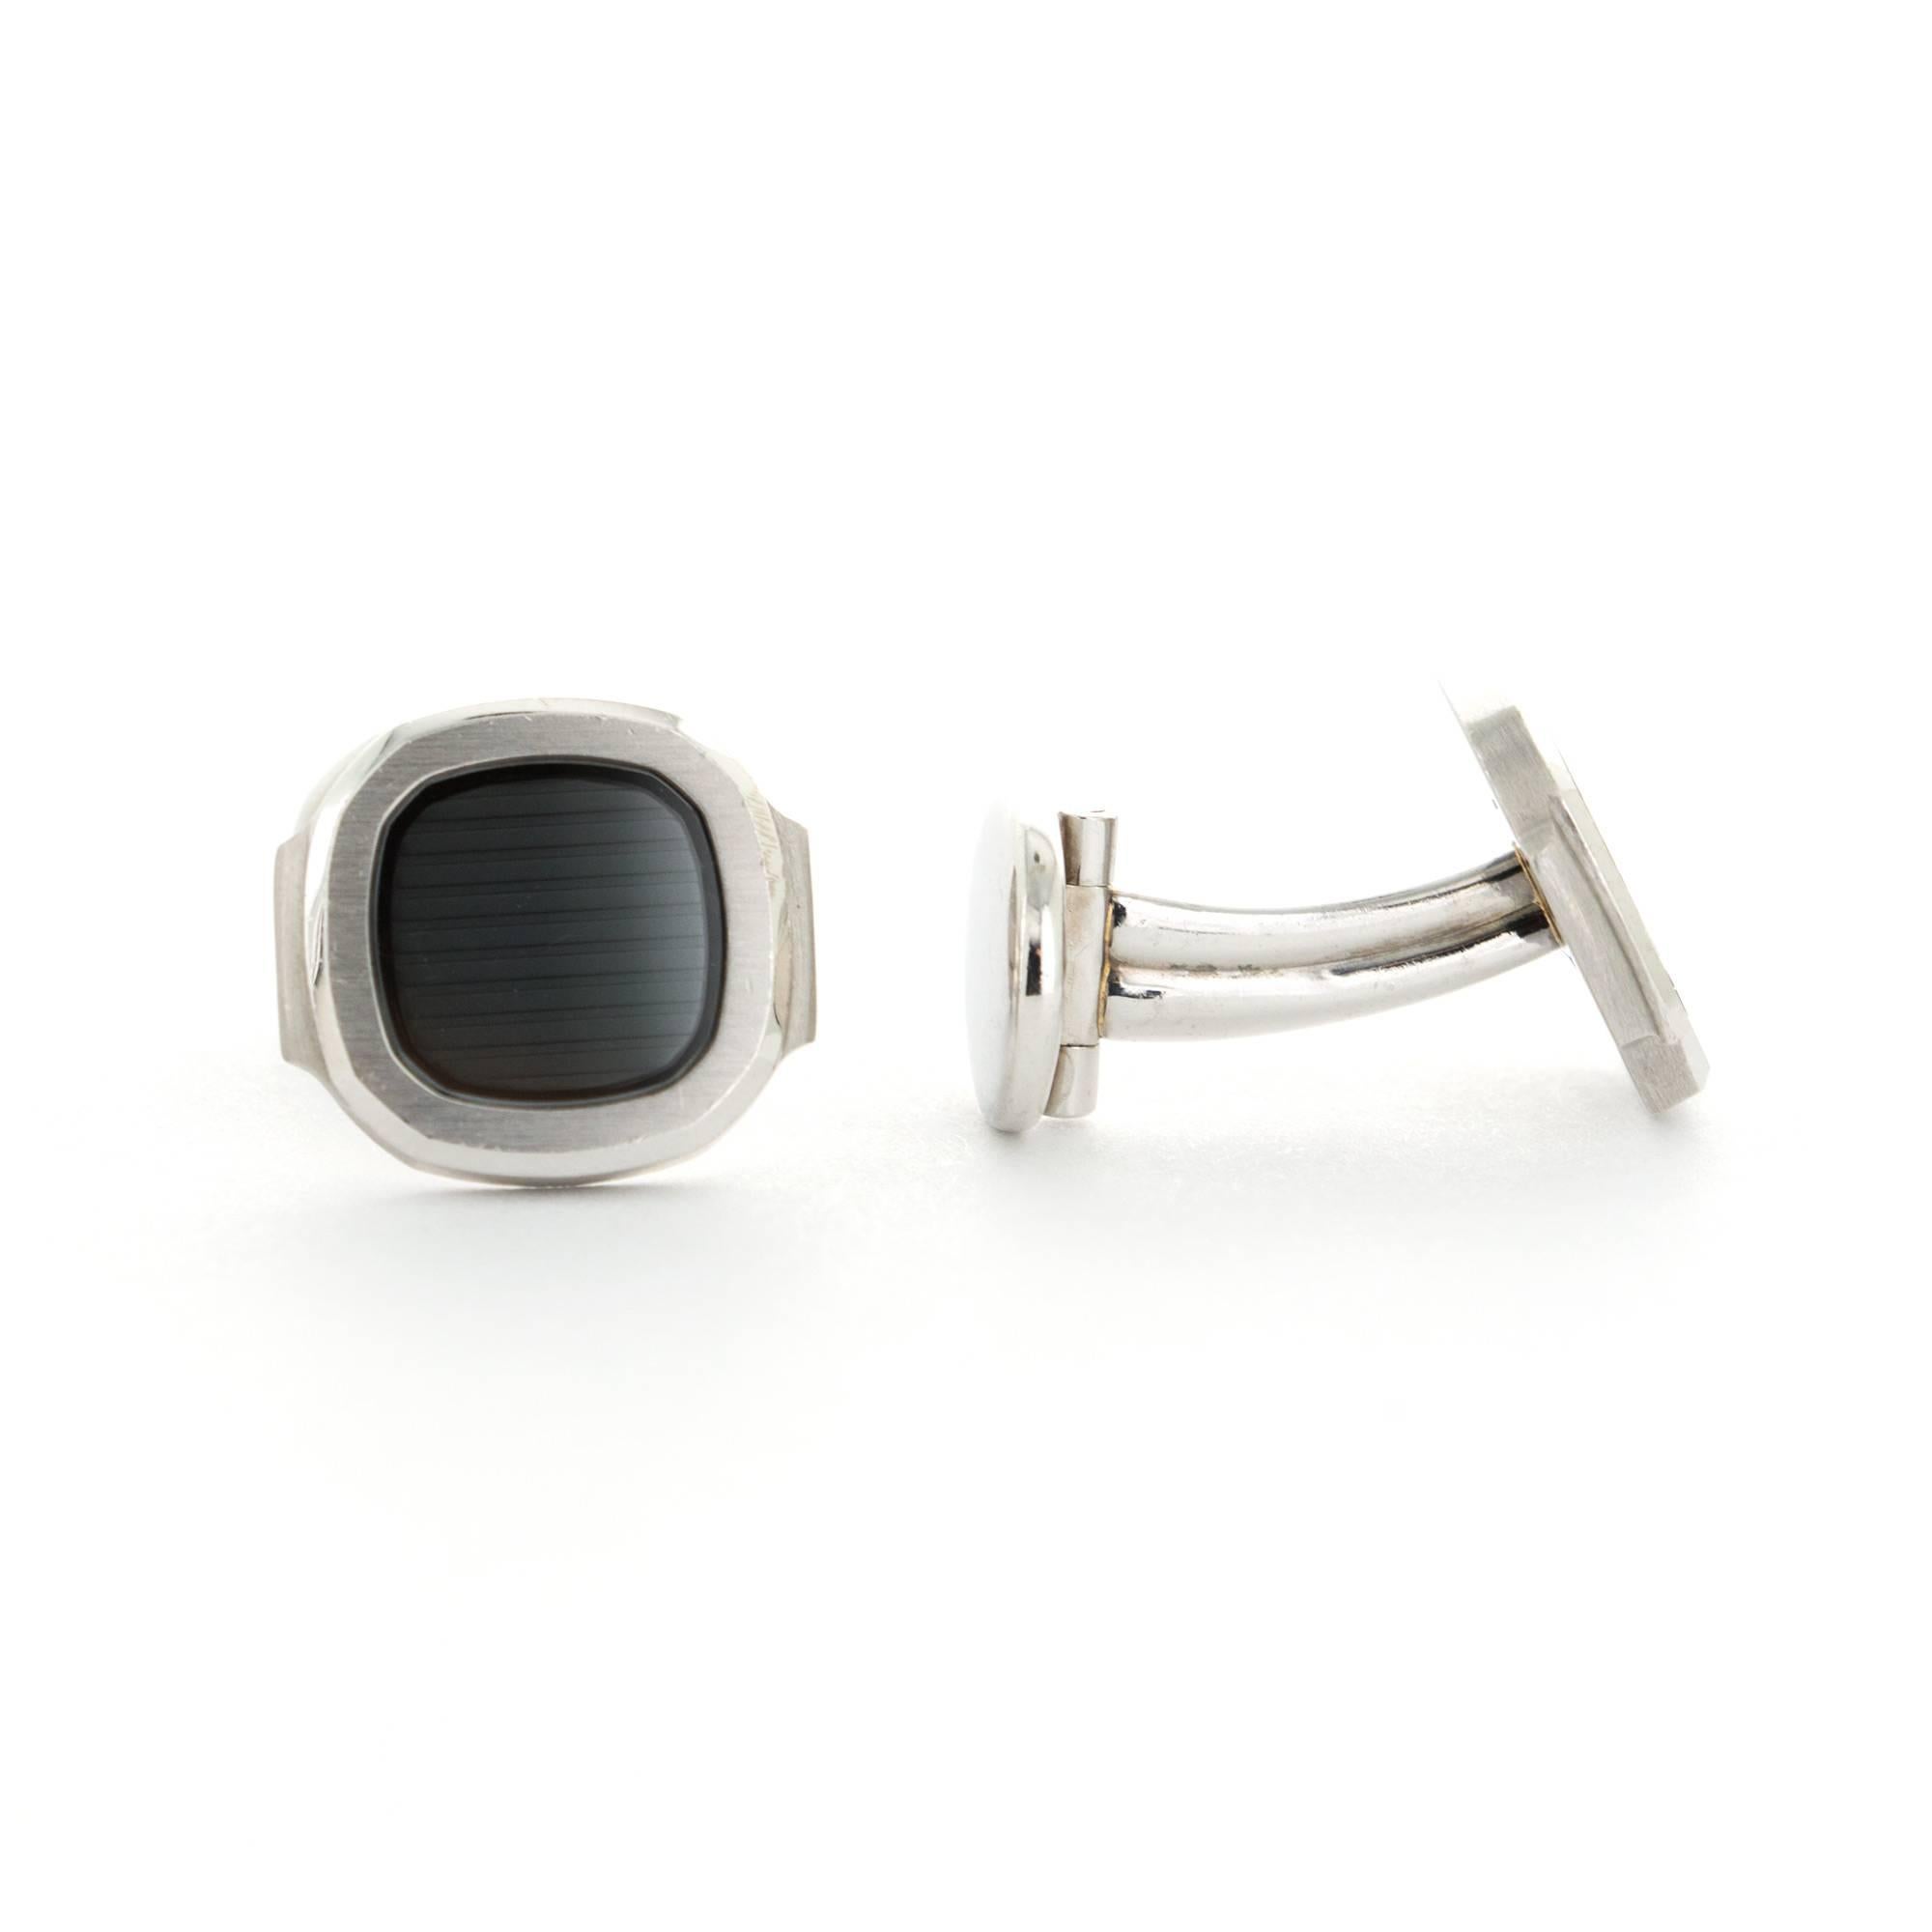 A Pair of 18k White Gold Cufflinks by Patek Philippe from the Nautilus Collection. Signed 